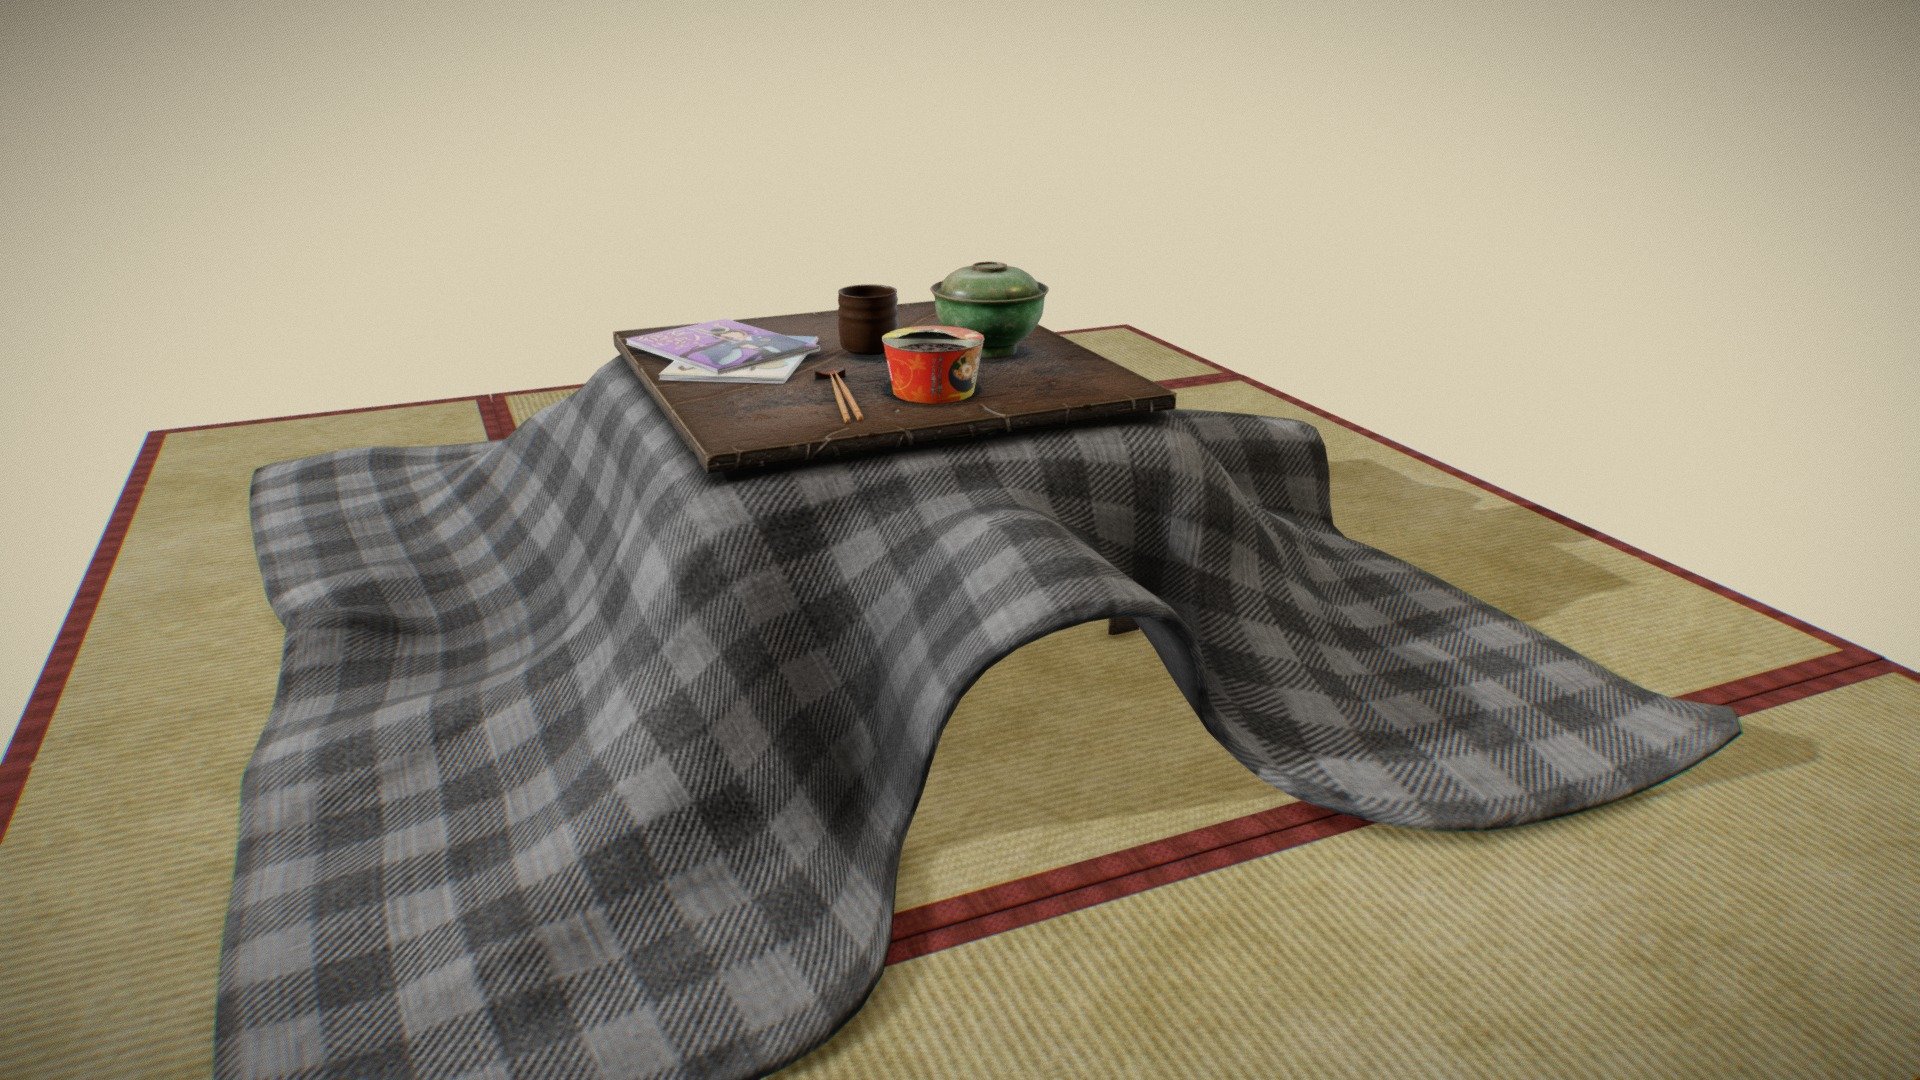 It's a part pf my little scene in japanese style, i just want to share my results with you. For this scene i create:
1. Kotatsu - table
2. Fast-cooked noodle with my design
3. Manga
4. Hashi
5. Clay cup
6. Shiruwan - plate for soup
7. Tatami - floor
Please subscribe if you like my works - Japanese table kotatsu - 3D model by nicolas_solo 3d model